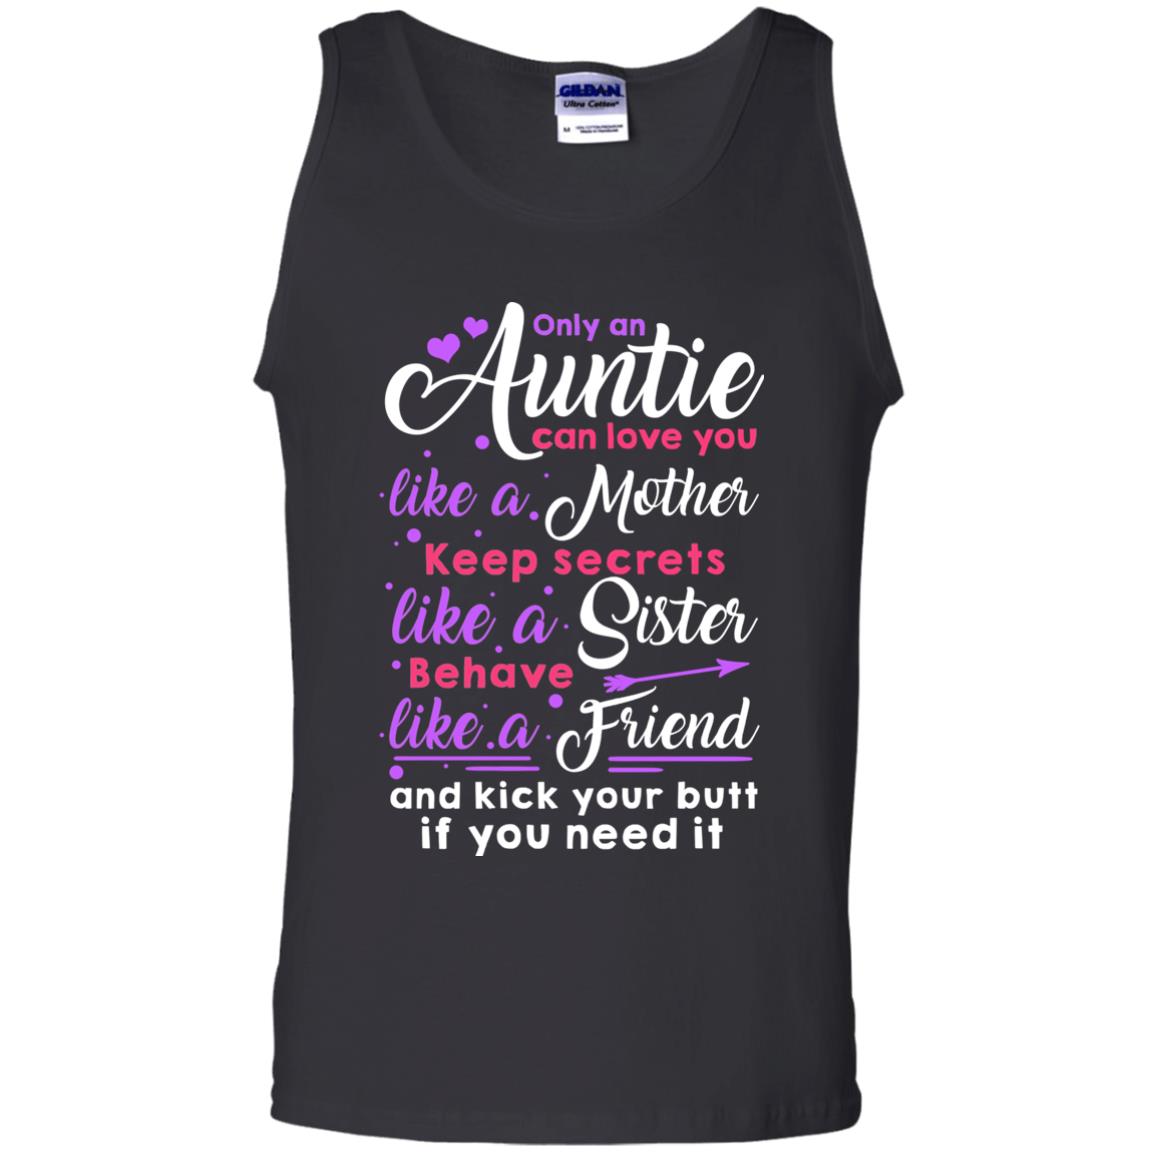 Only An Auntie Can Love You Like A Mother Keep Secrets Like A Sister Behave Like A Friend And Kick Your Butt If You Need ItG220 Gildan 100% Cotton Tank Top